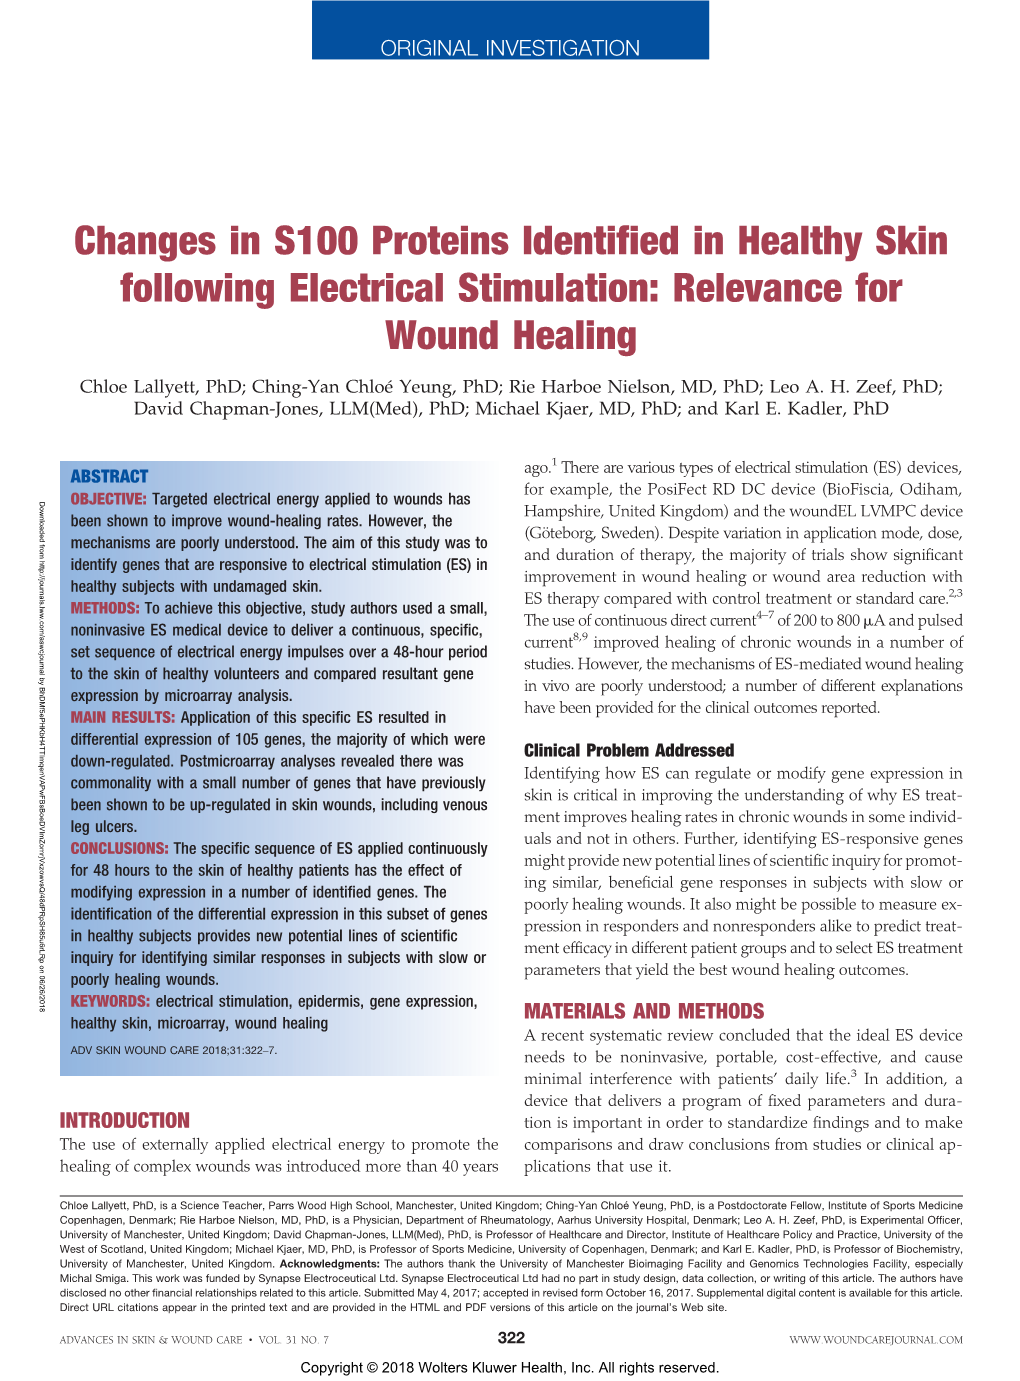 Changes in S100 Proteins Identified in Healthy Skin Following Electrical